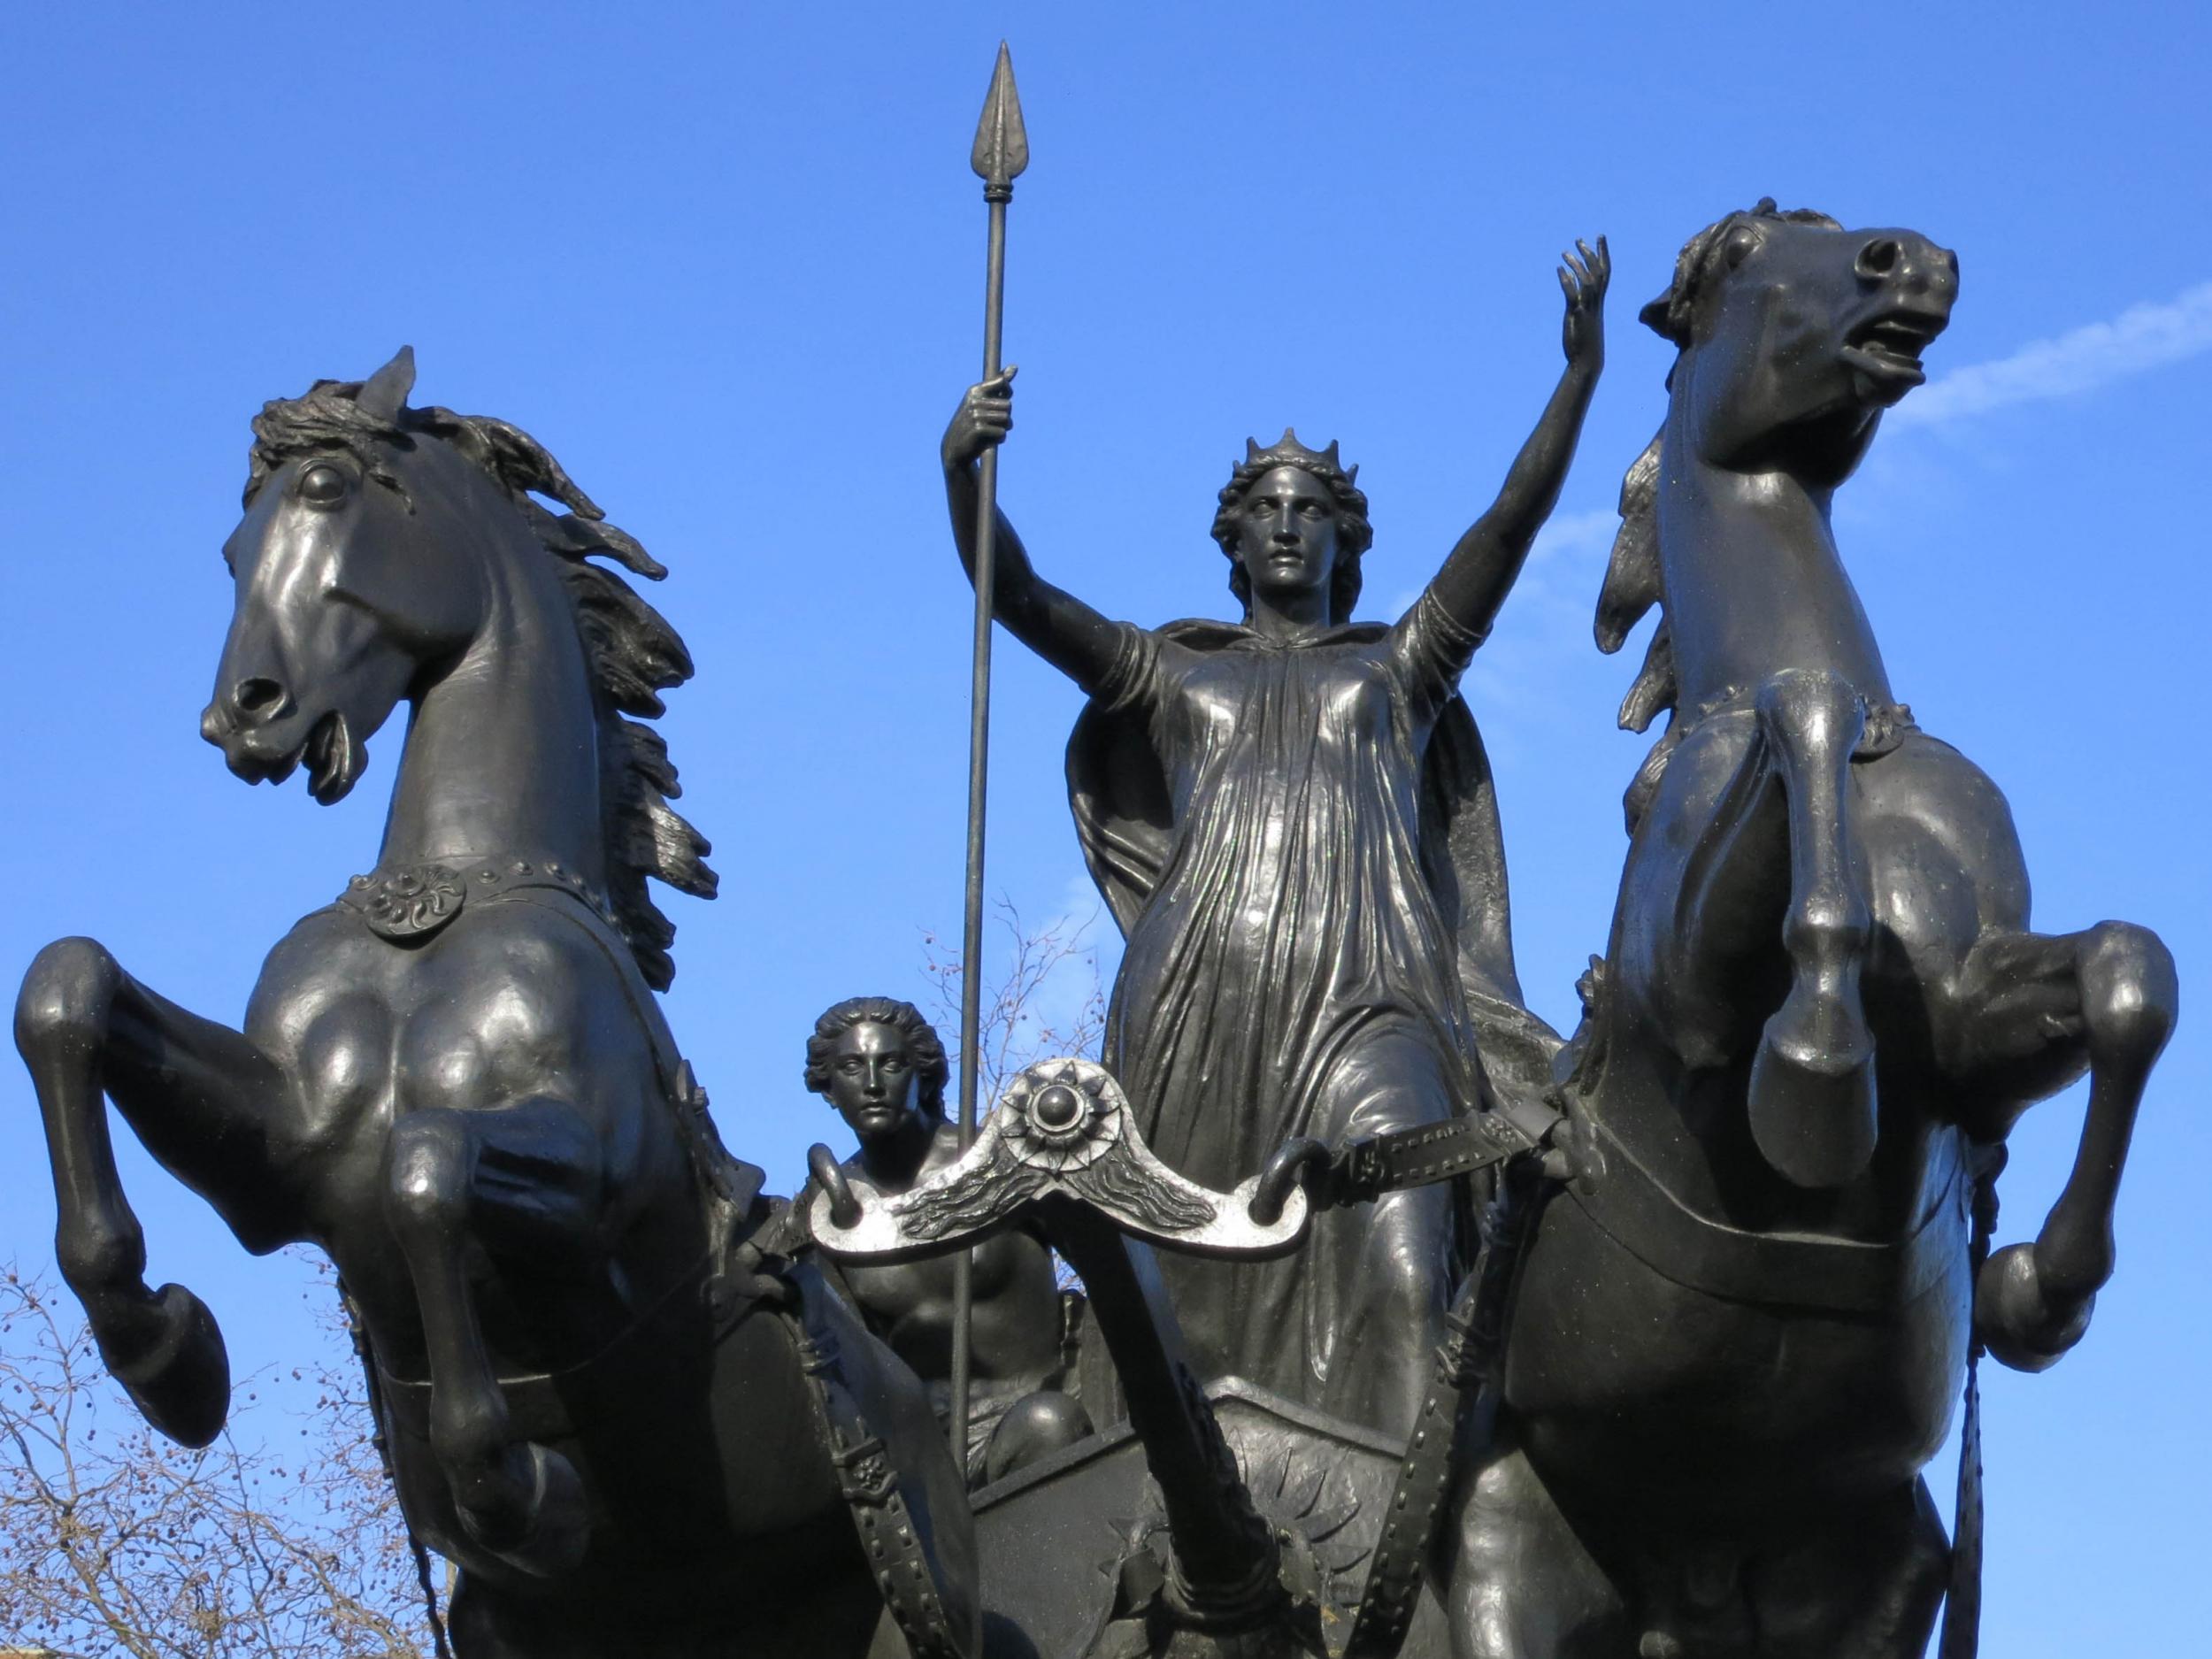 Boudicca was viewed by the Roman men who recorded her history as a woman hell-bent on vengeance